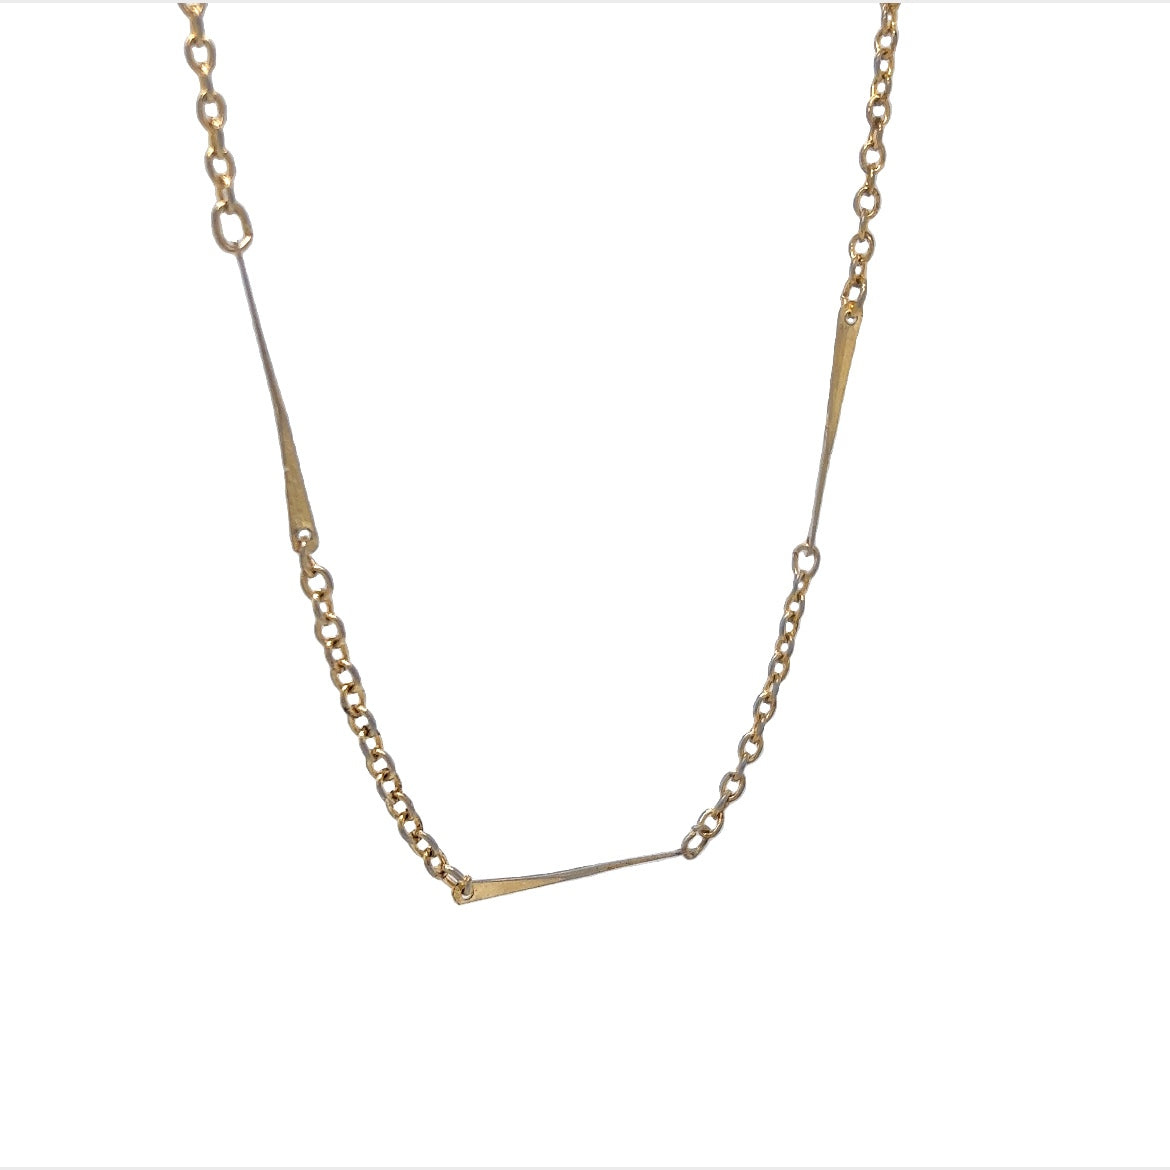 20 Inch Mid-Century Bar Chain Necklace in 14k Yellow Gold